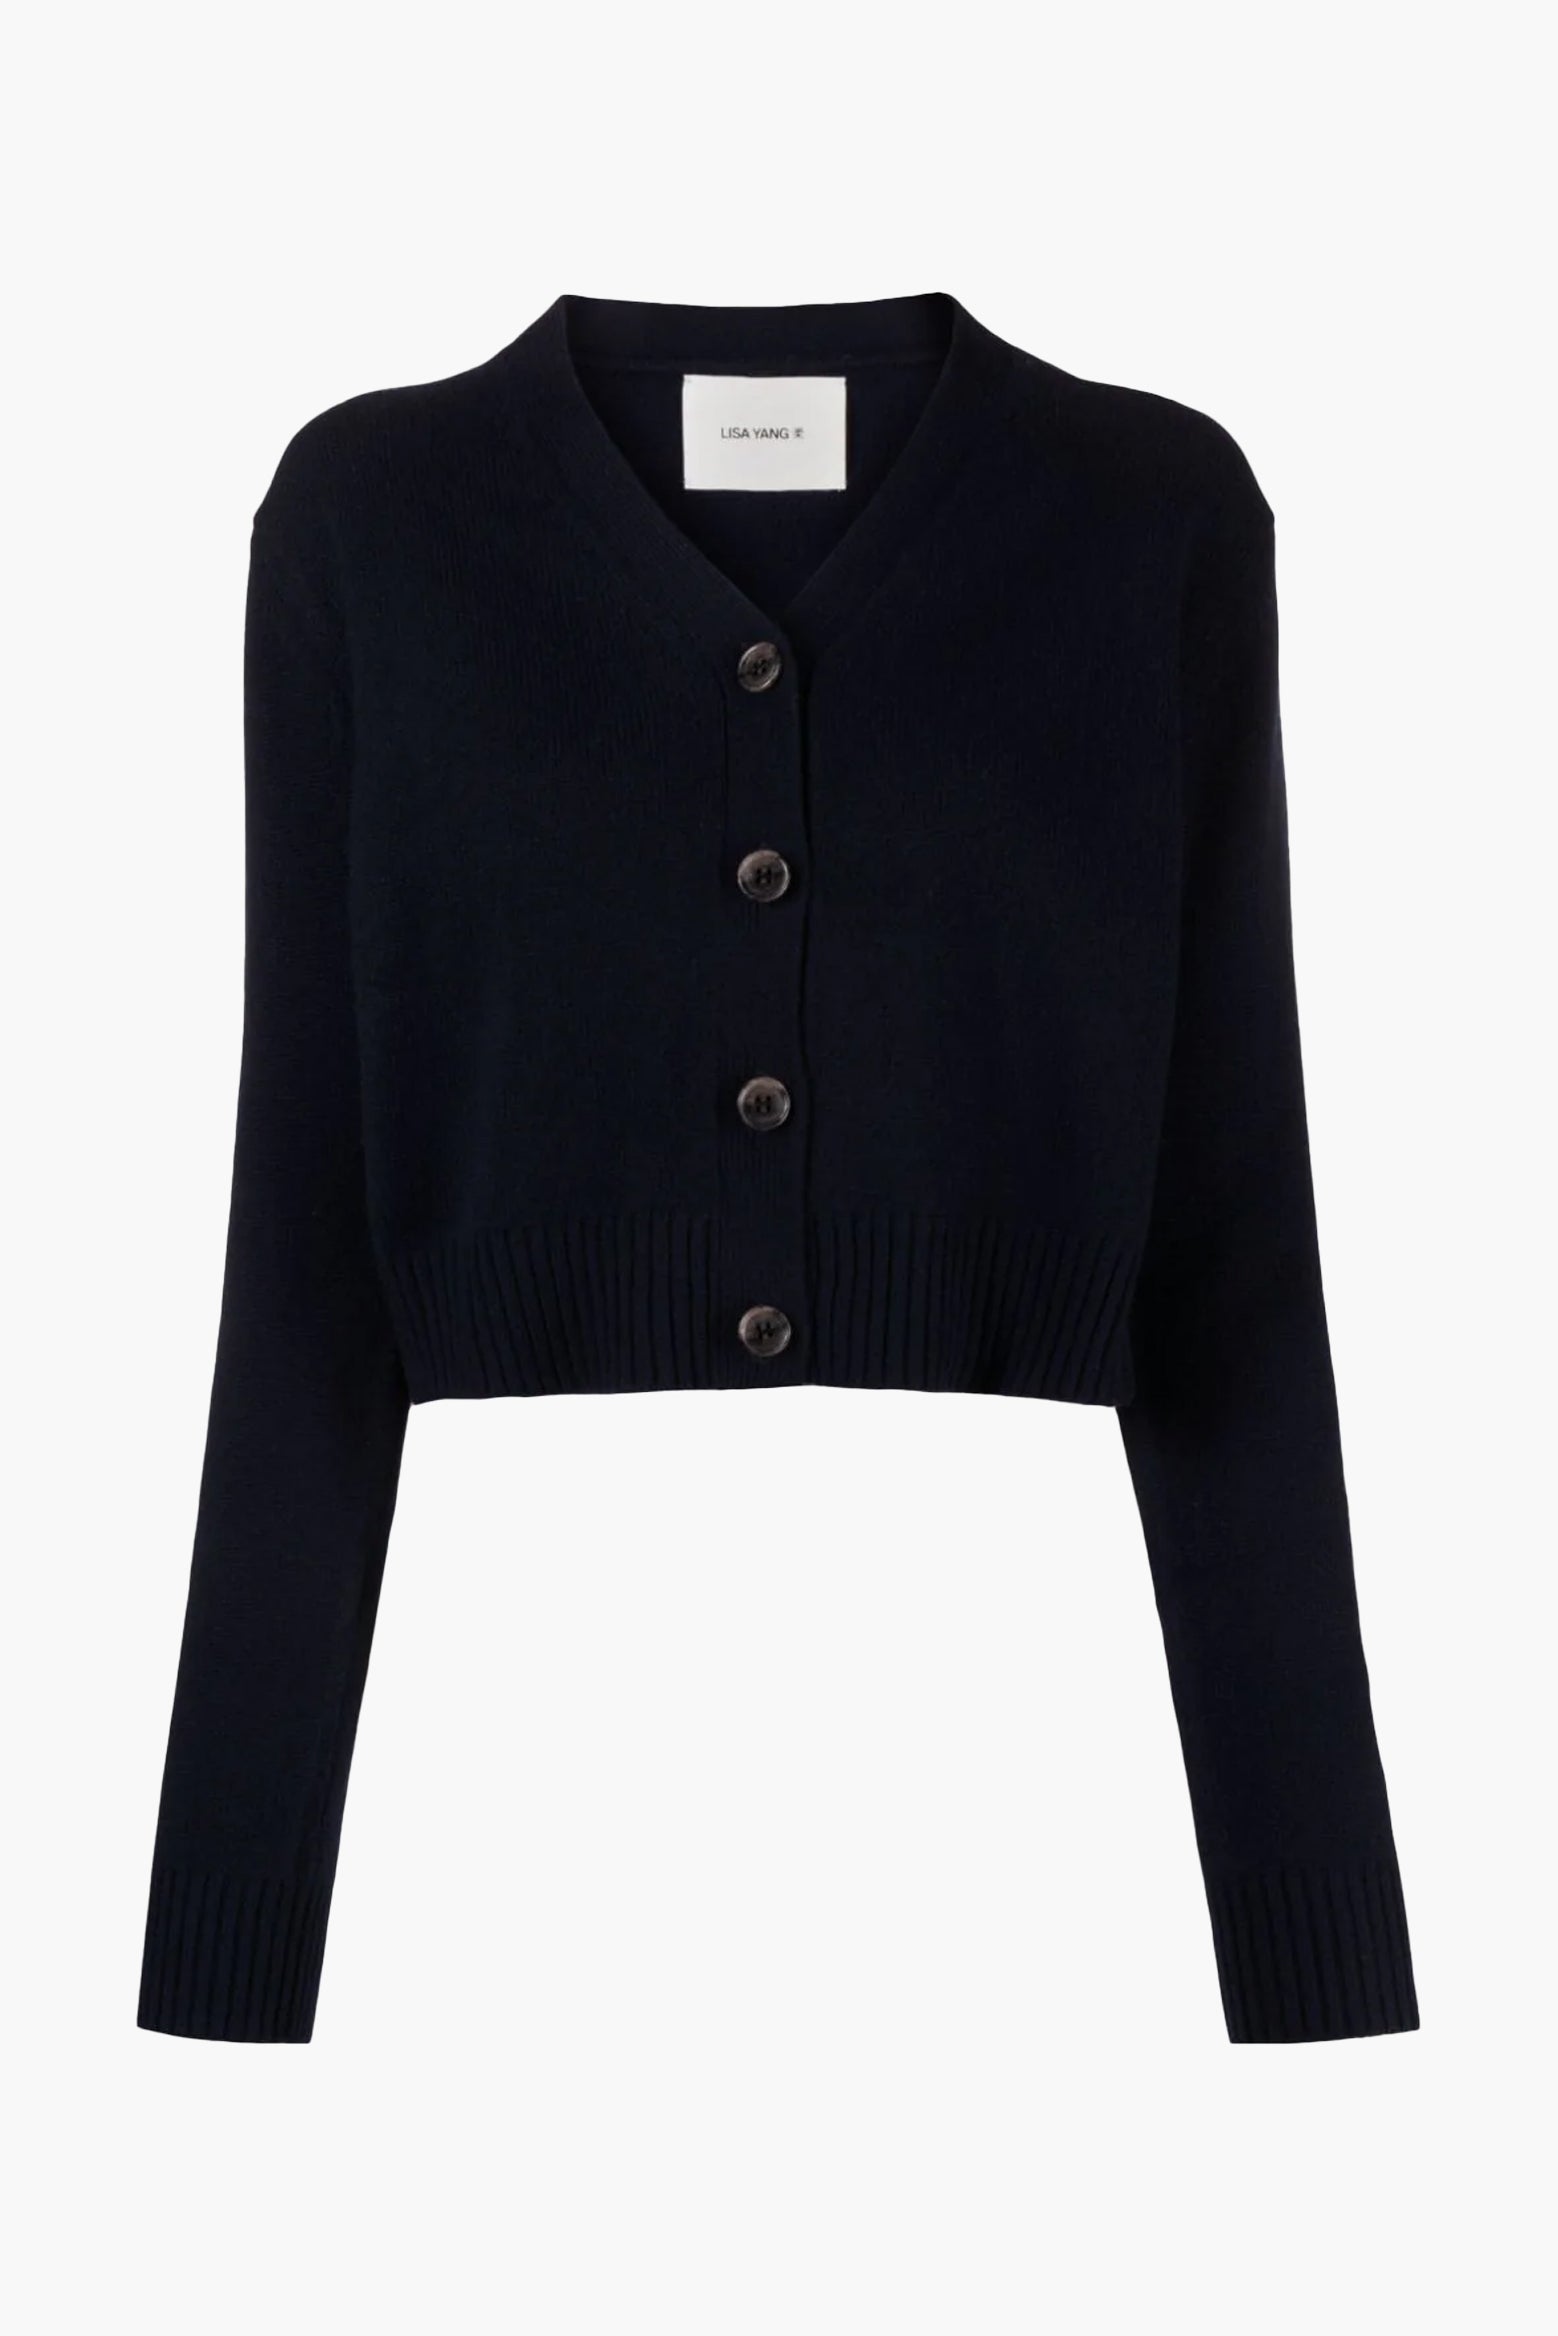 Lisa Yang Marion Cardigan in Black available at The New Trend Australia. 